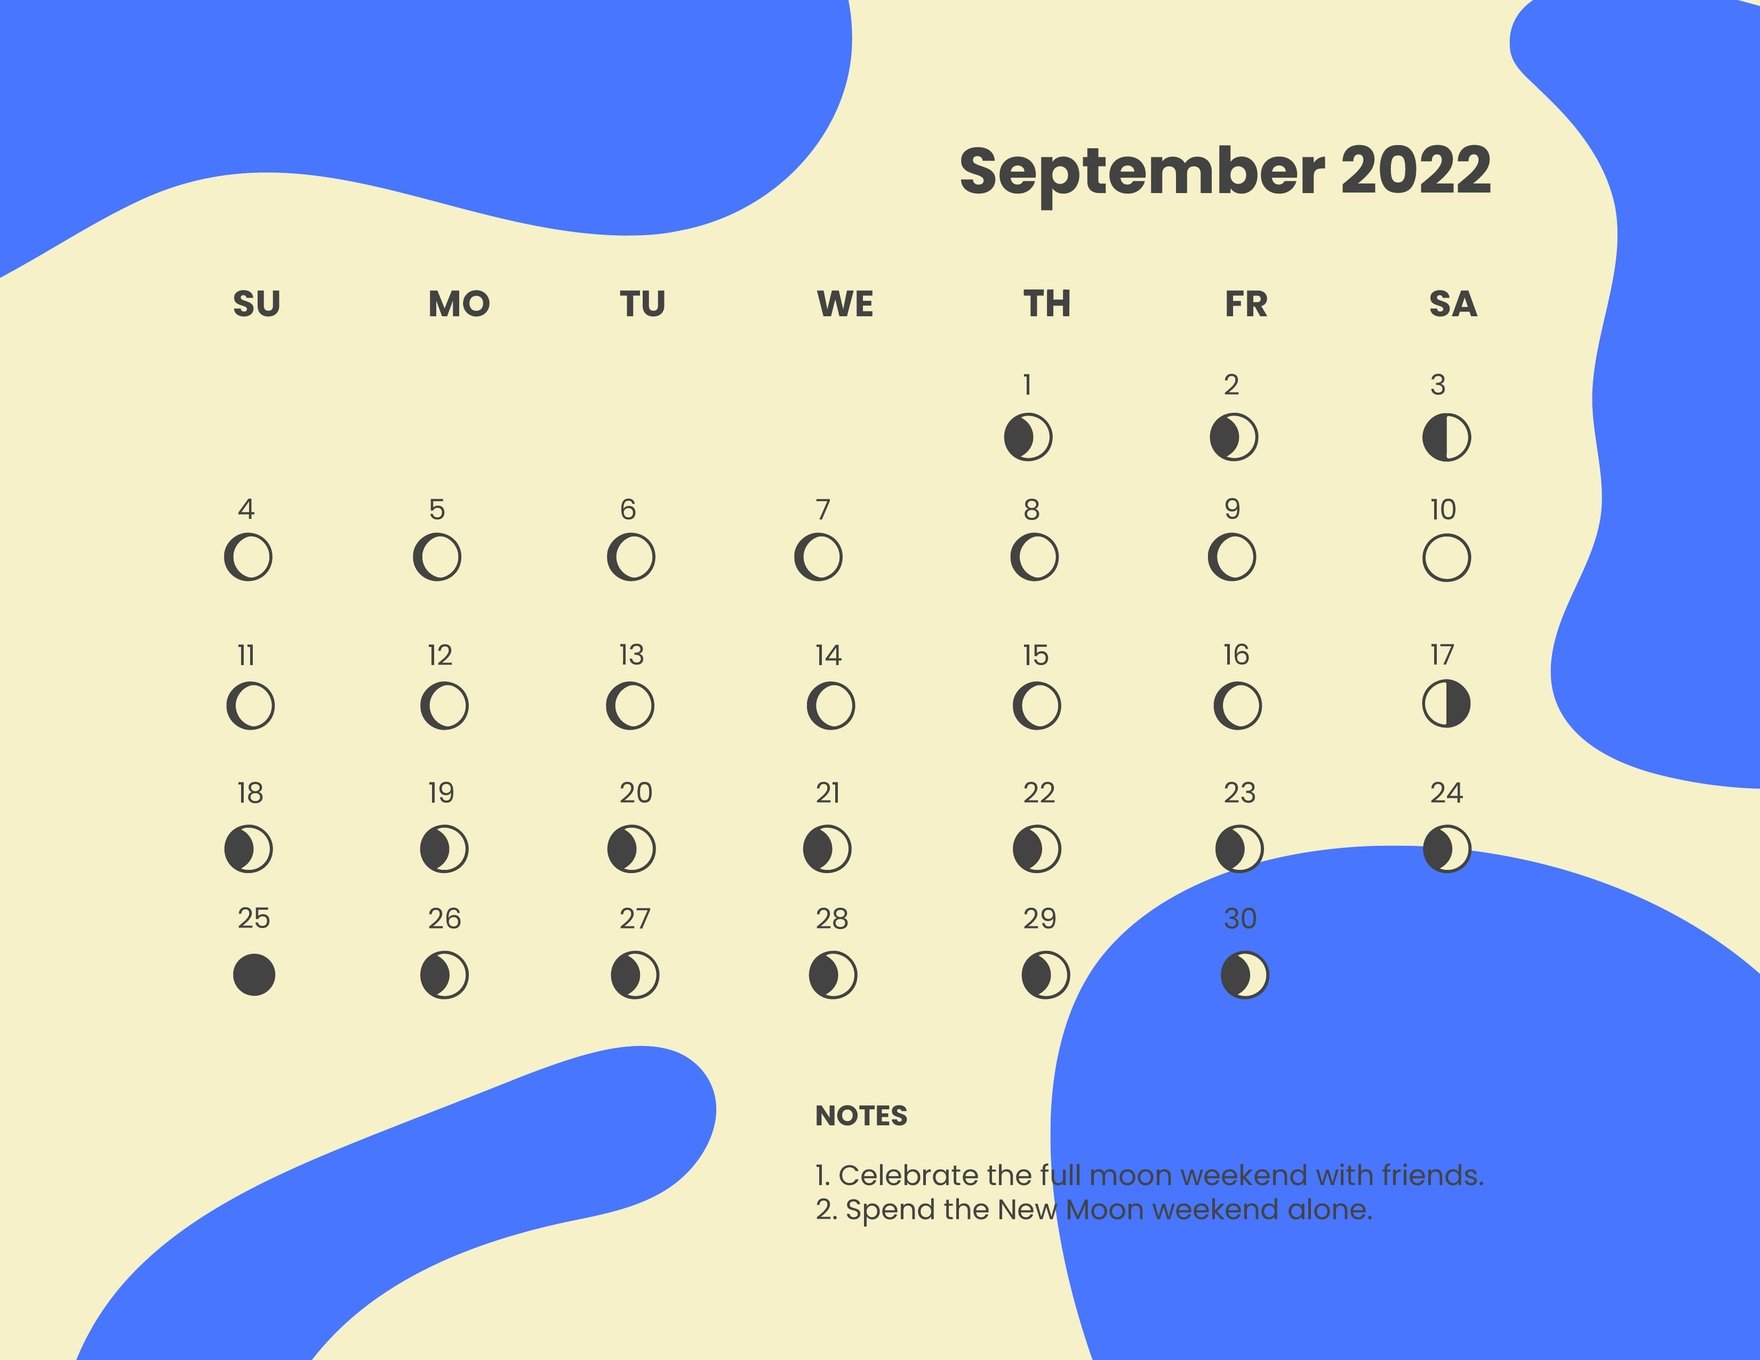 September 2022 Calendar Template With Moon Phases in Word, Illustrator, PSD